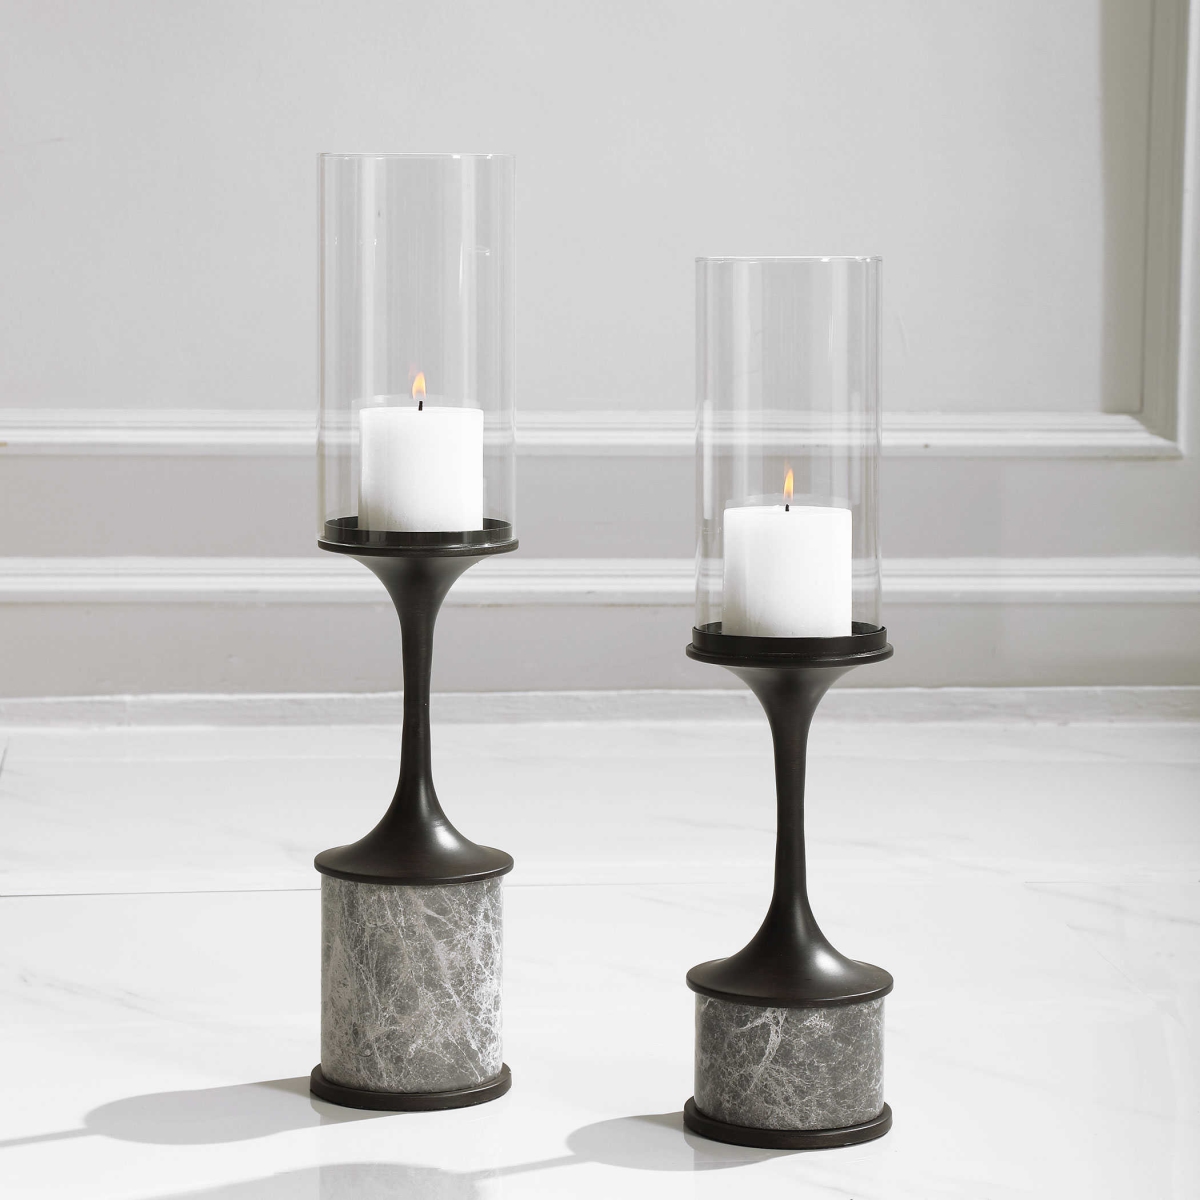 Picture of 212 Main 17882 15.25 x 7.75 x 31.5 in. Deane Marble Candle Holders - Set of 2